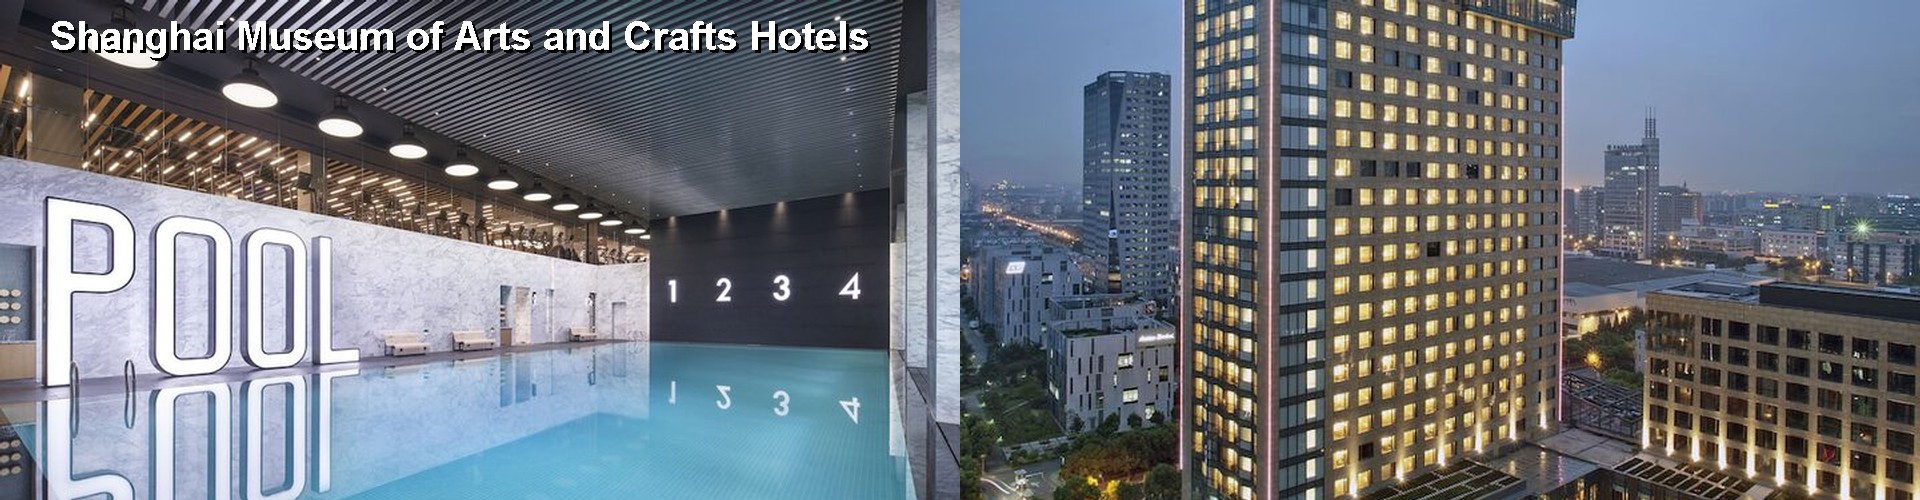 5 Best Hotels near Shanghai Museum of Arts and Crafts